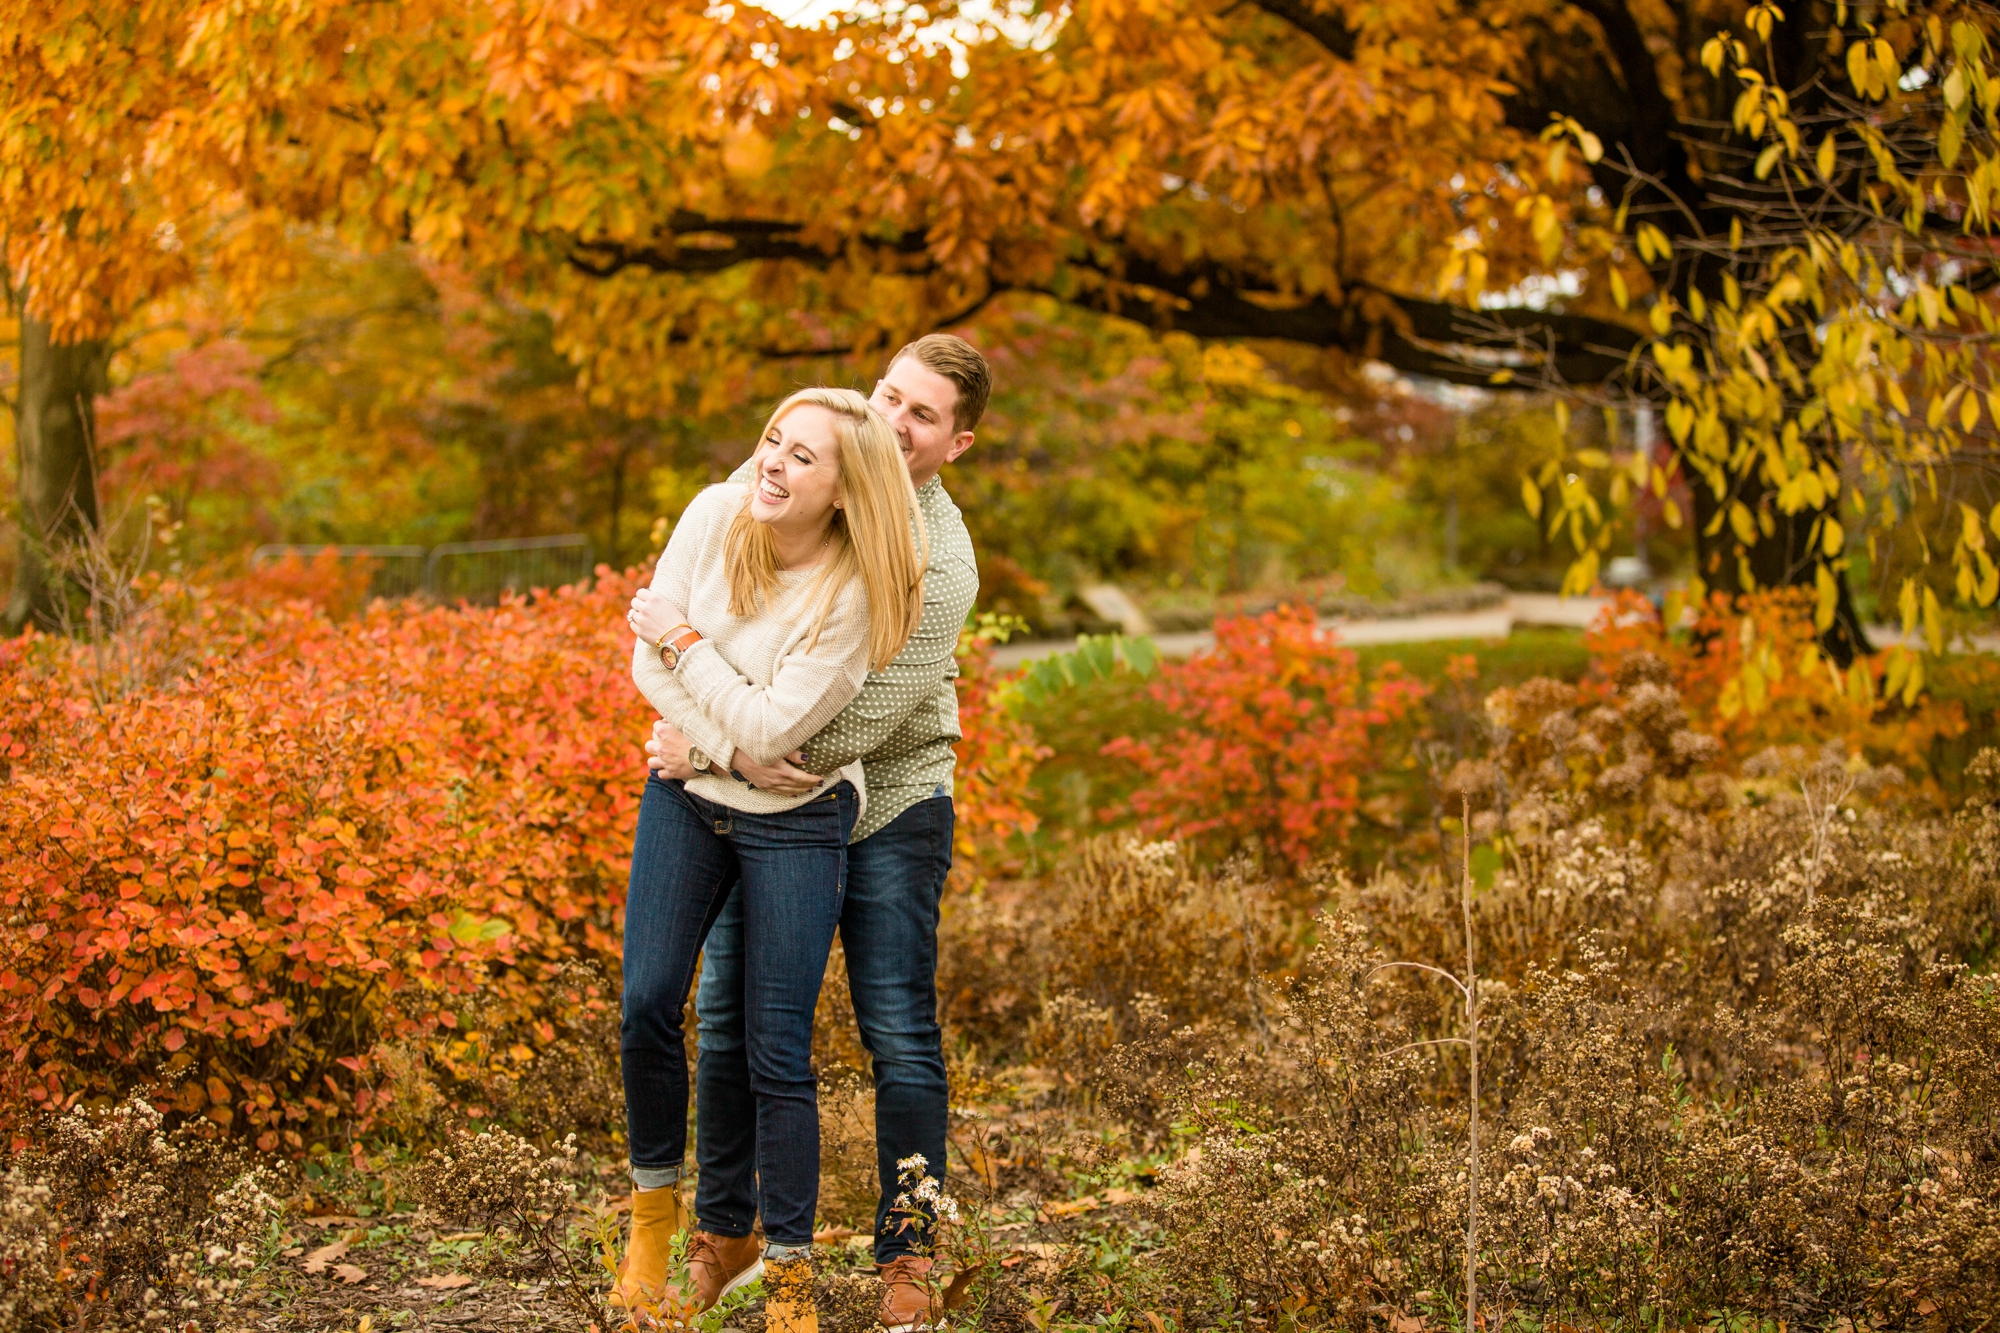 pittsburgh wedding photographer, pittsburgh engagement photos, best spot in pittsburgh for photo shoot, highland park engagement pictures, point state park engagement photos